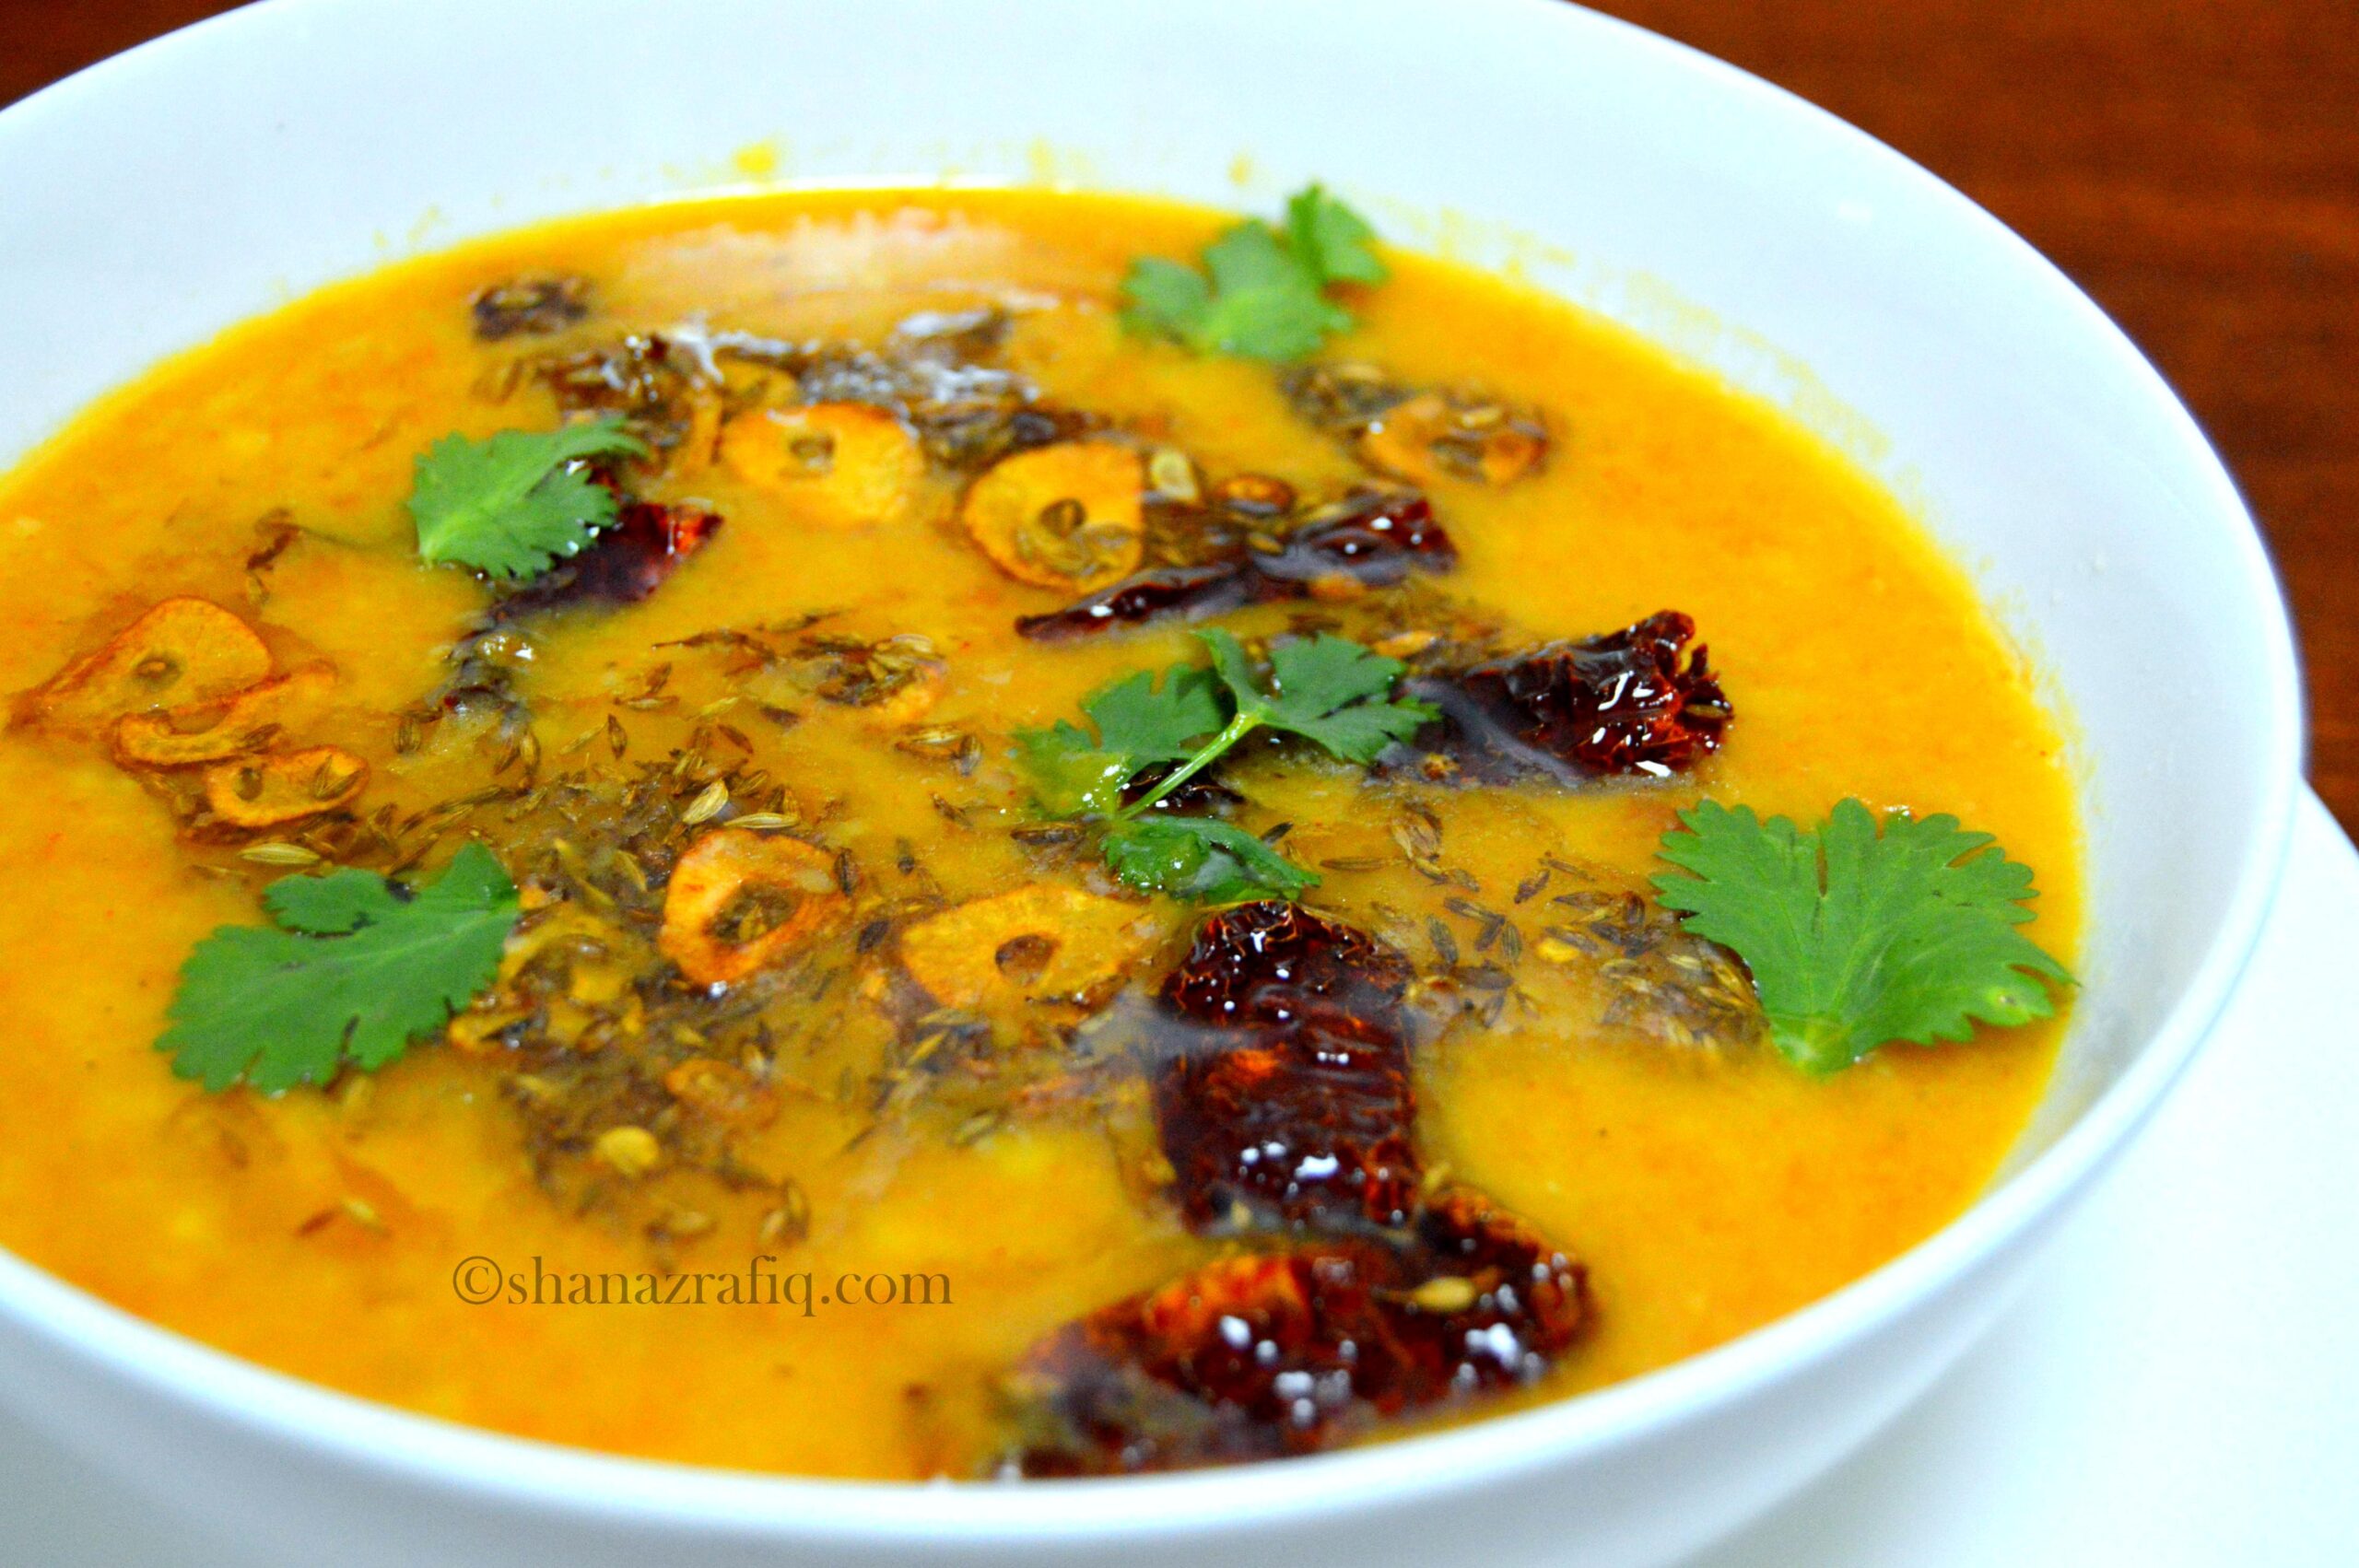  A bowl of Khatti Dal is the perfect way to warm up on a cozy night in.